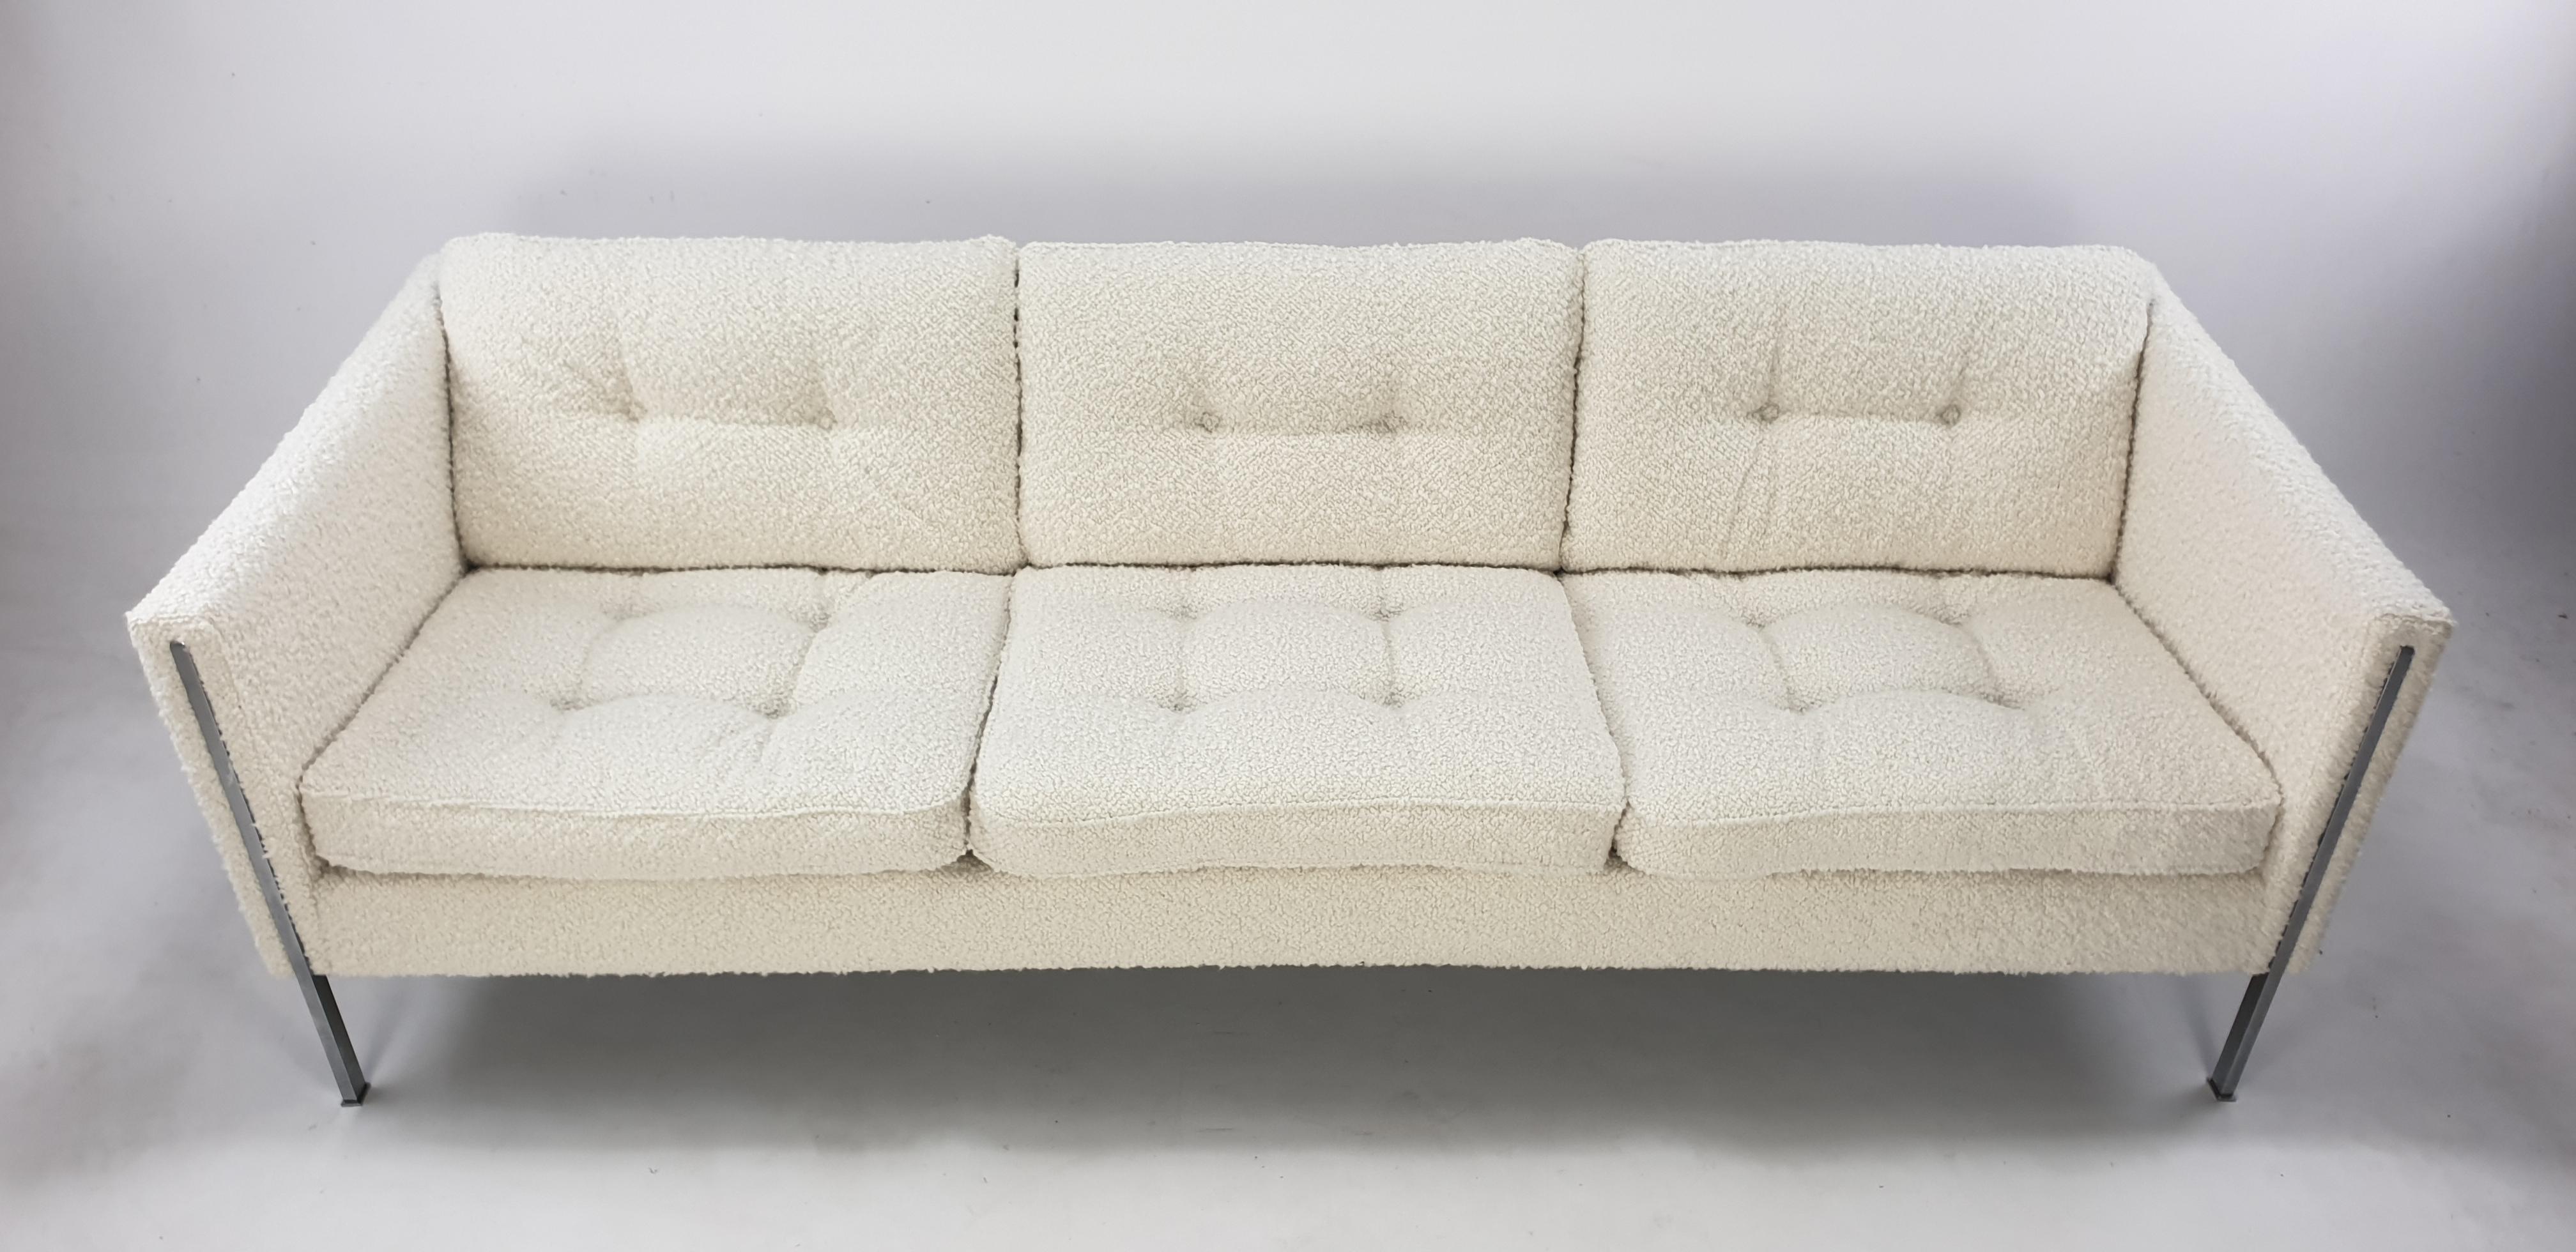 Woven Mid Century Model 442 Sofa by Pierre Paulin for Artifort, 1960s For Sale